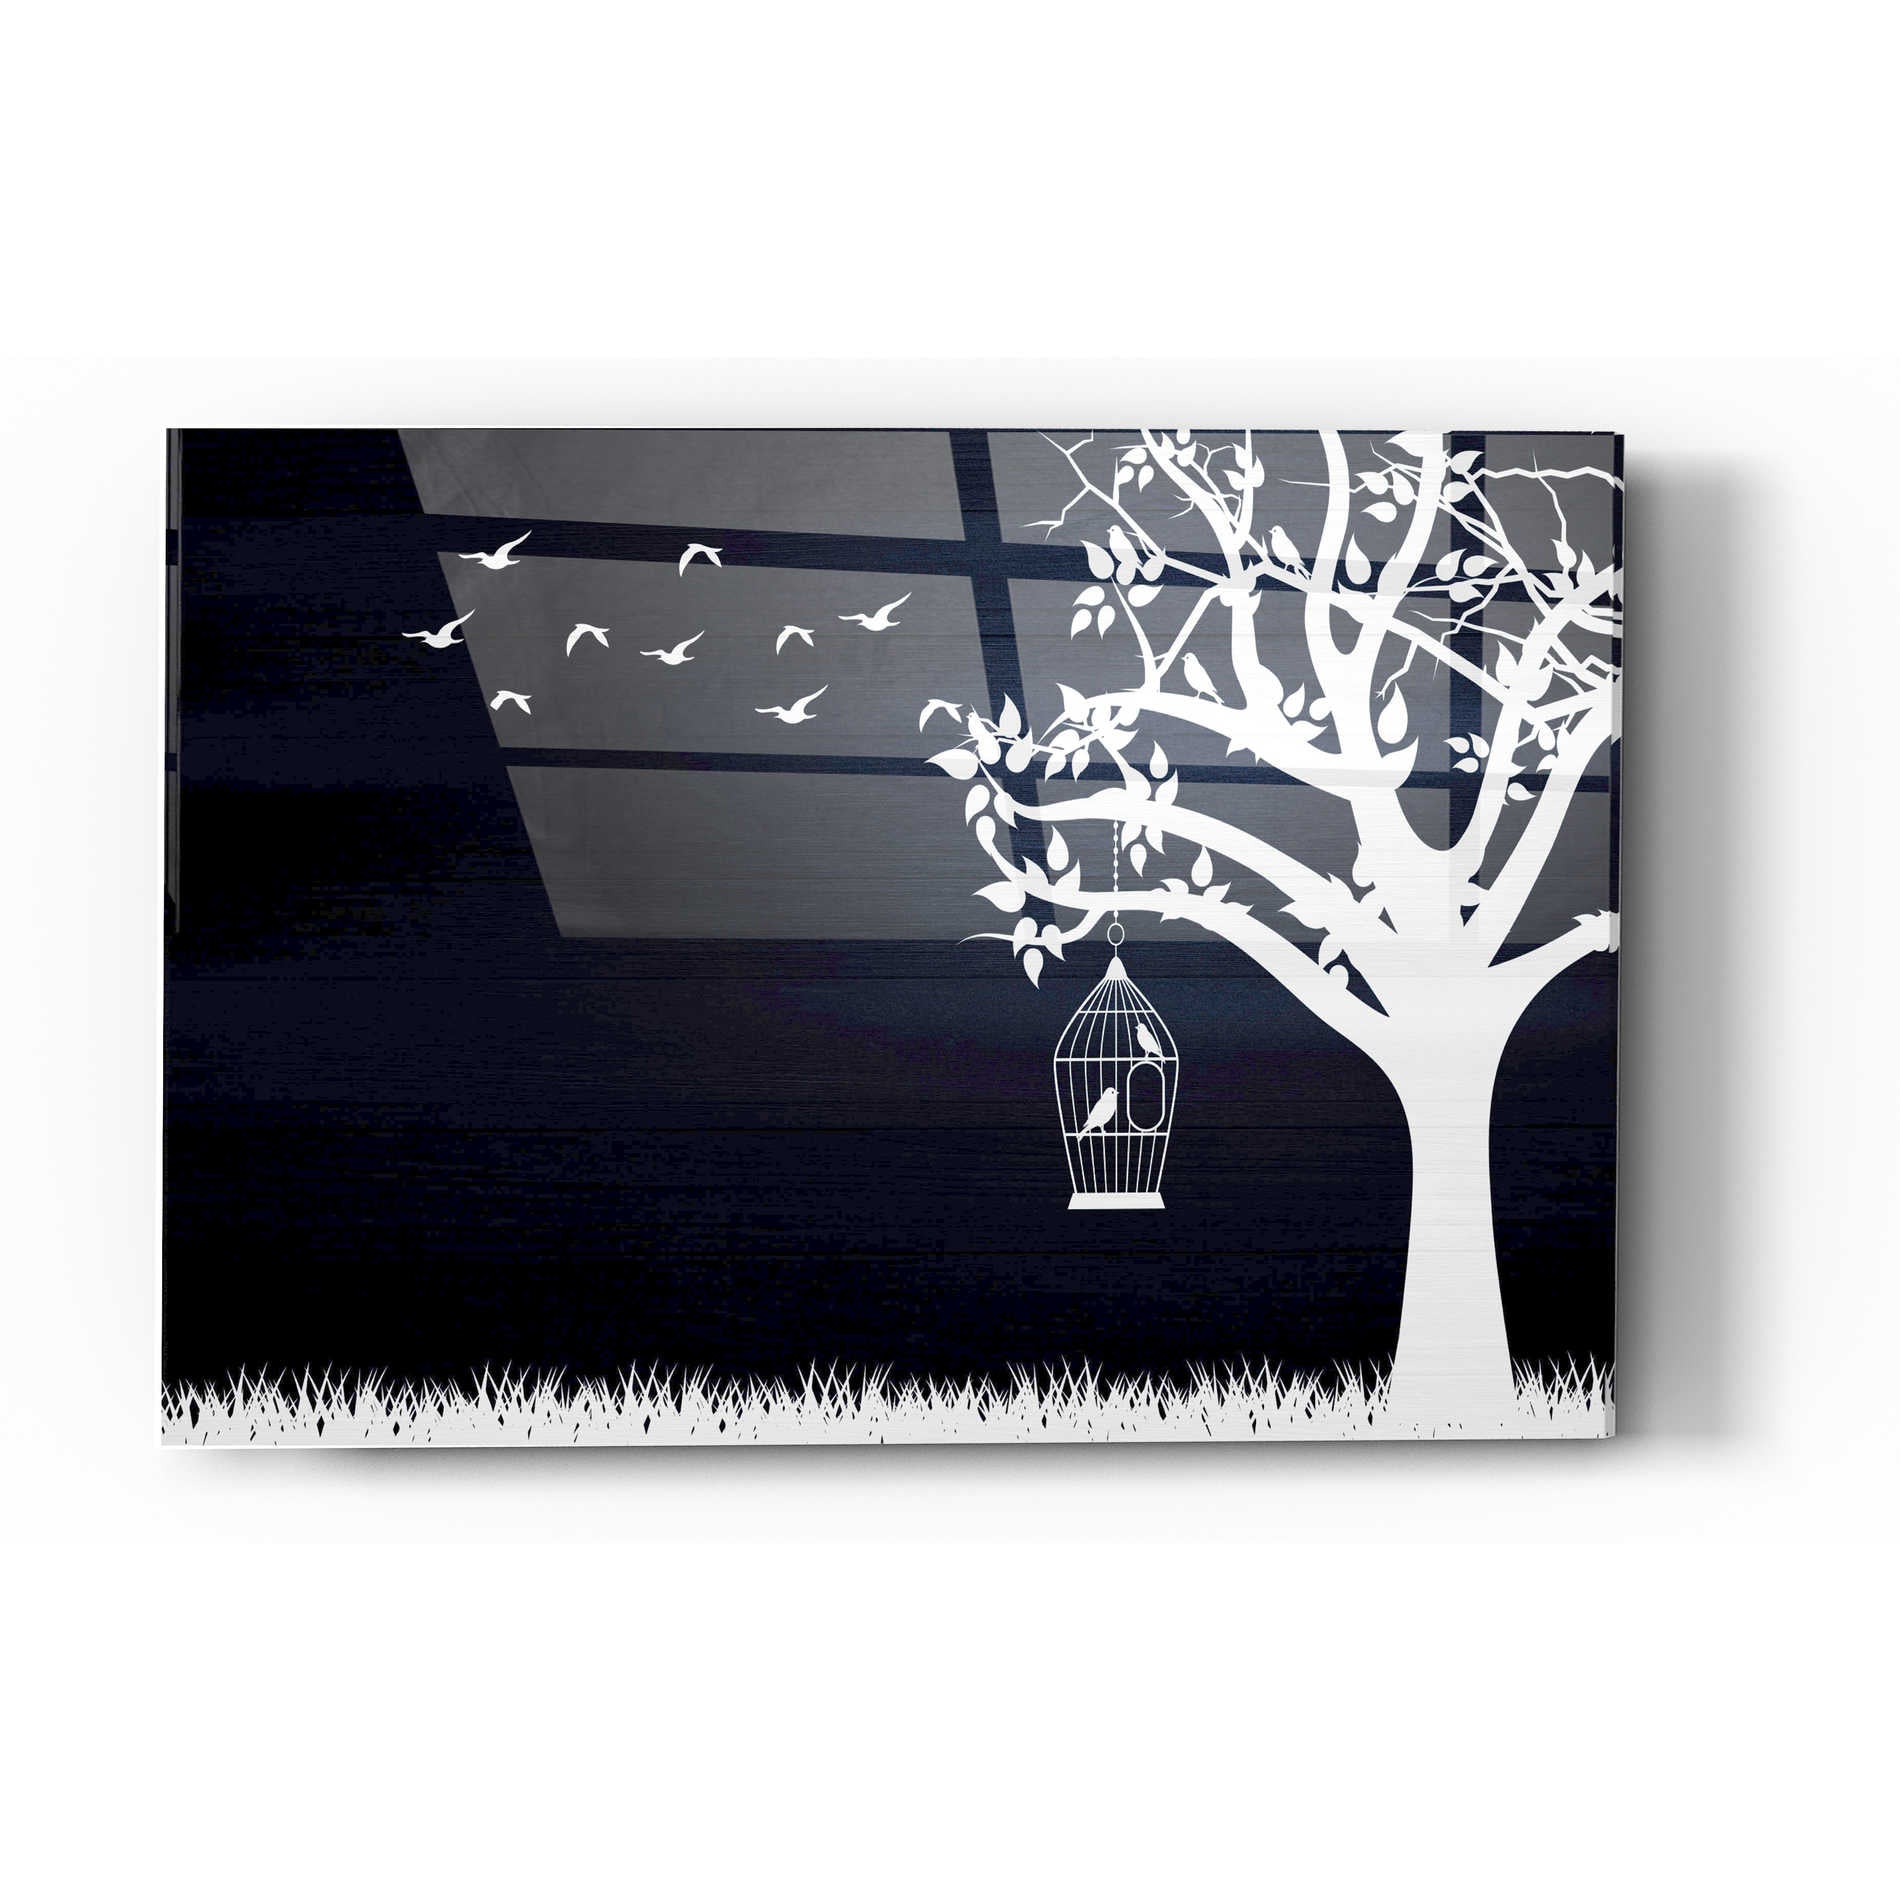 Epic Art "Wood Series: Birds and Tree, Inverted Silhouettes" Acrylic Glass Wall Art,16x24